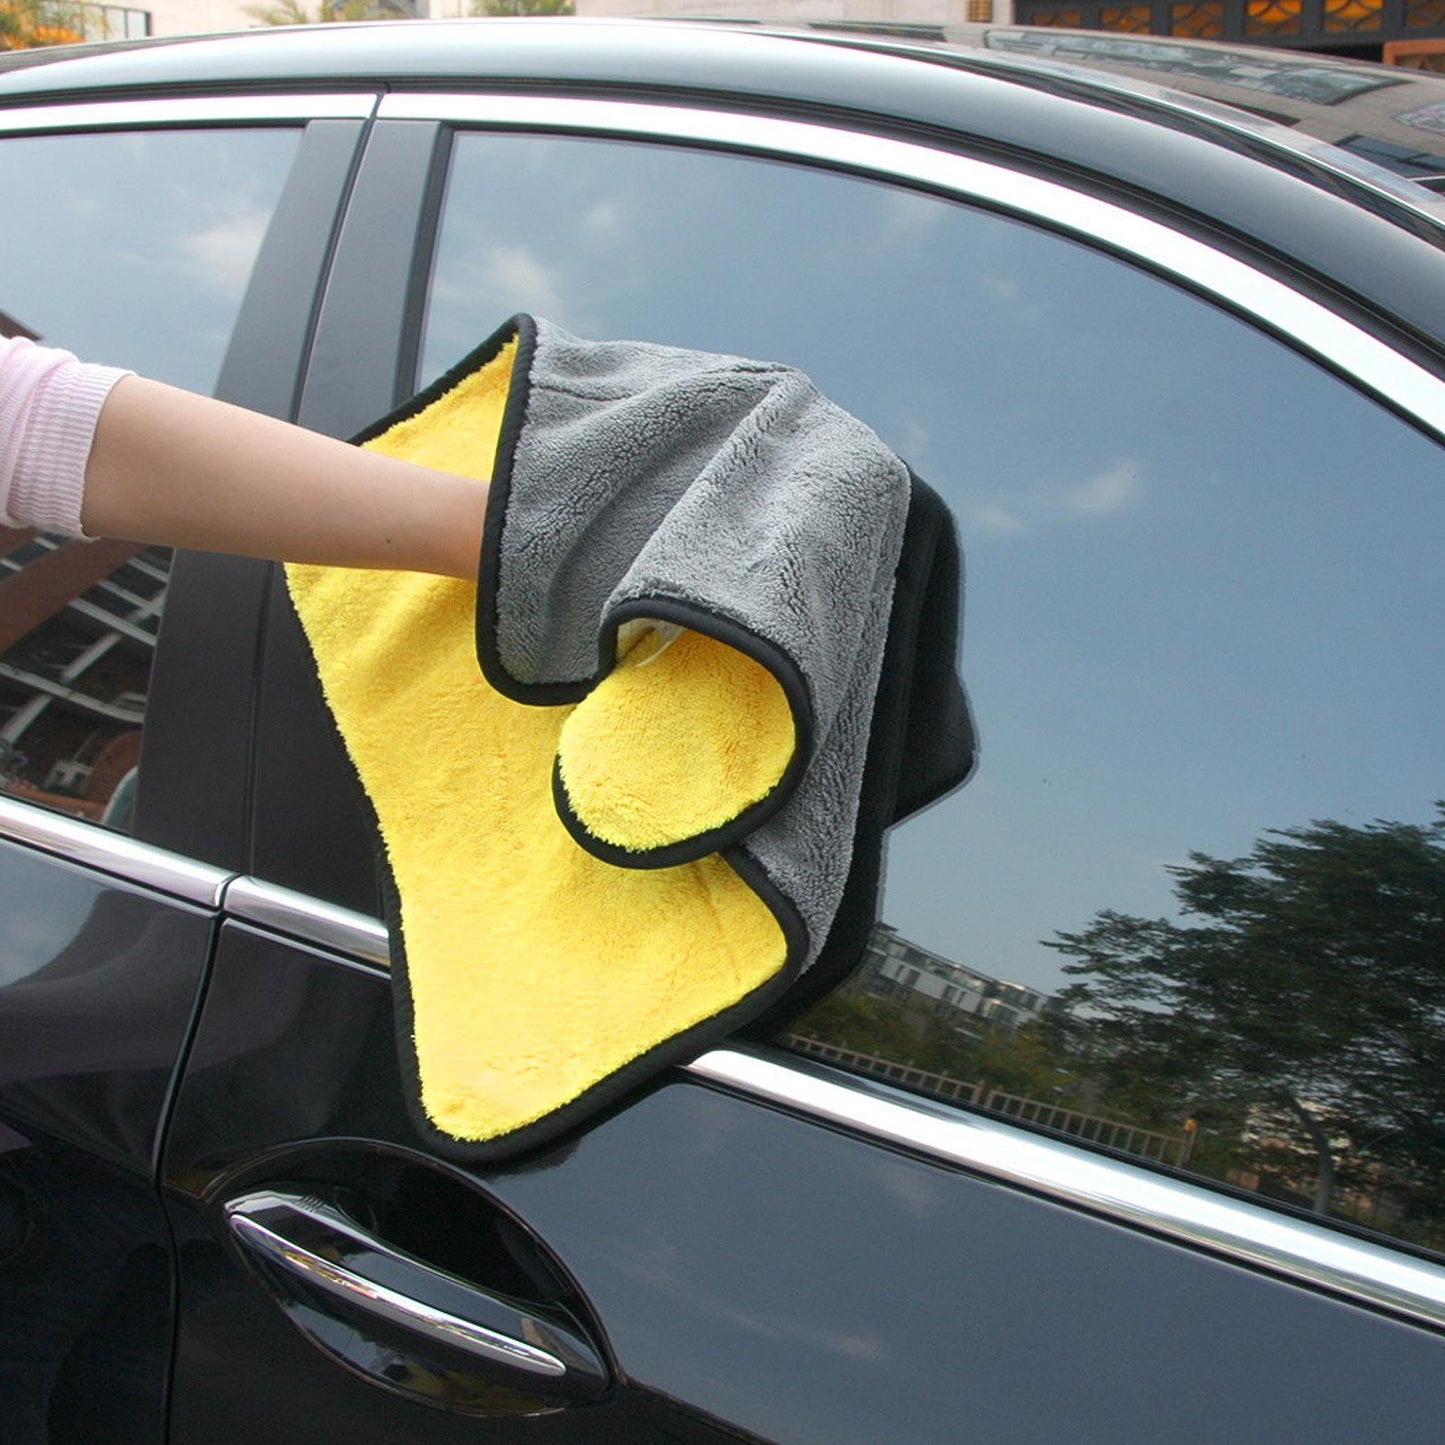 Ultra-Soft Microfiber Towel For Car Buffing And Detailing